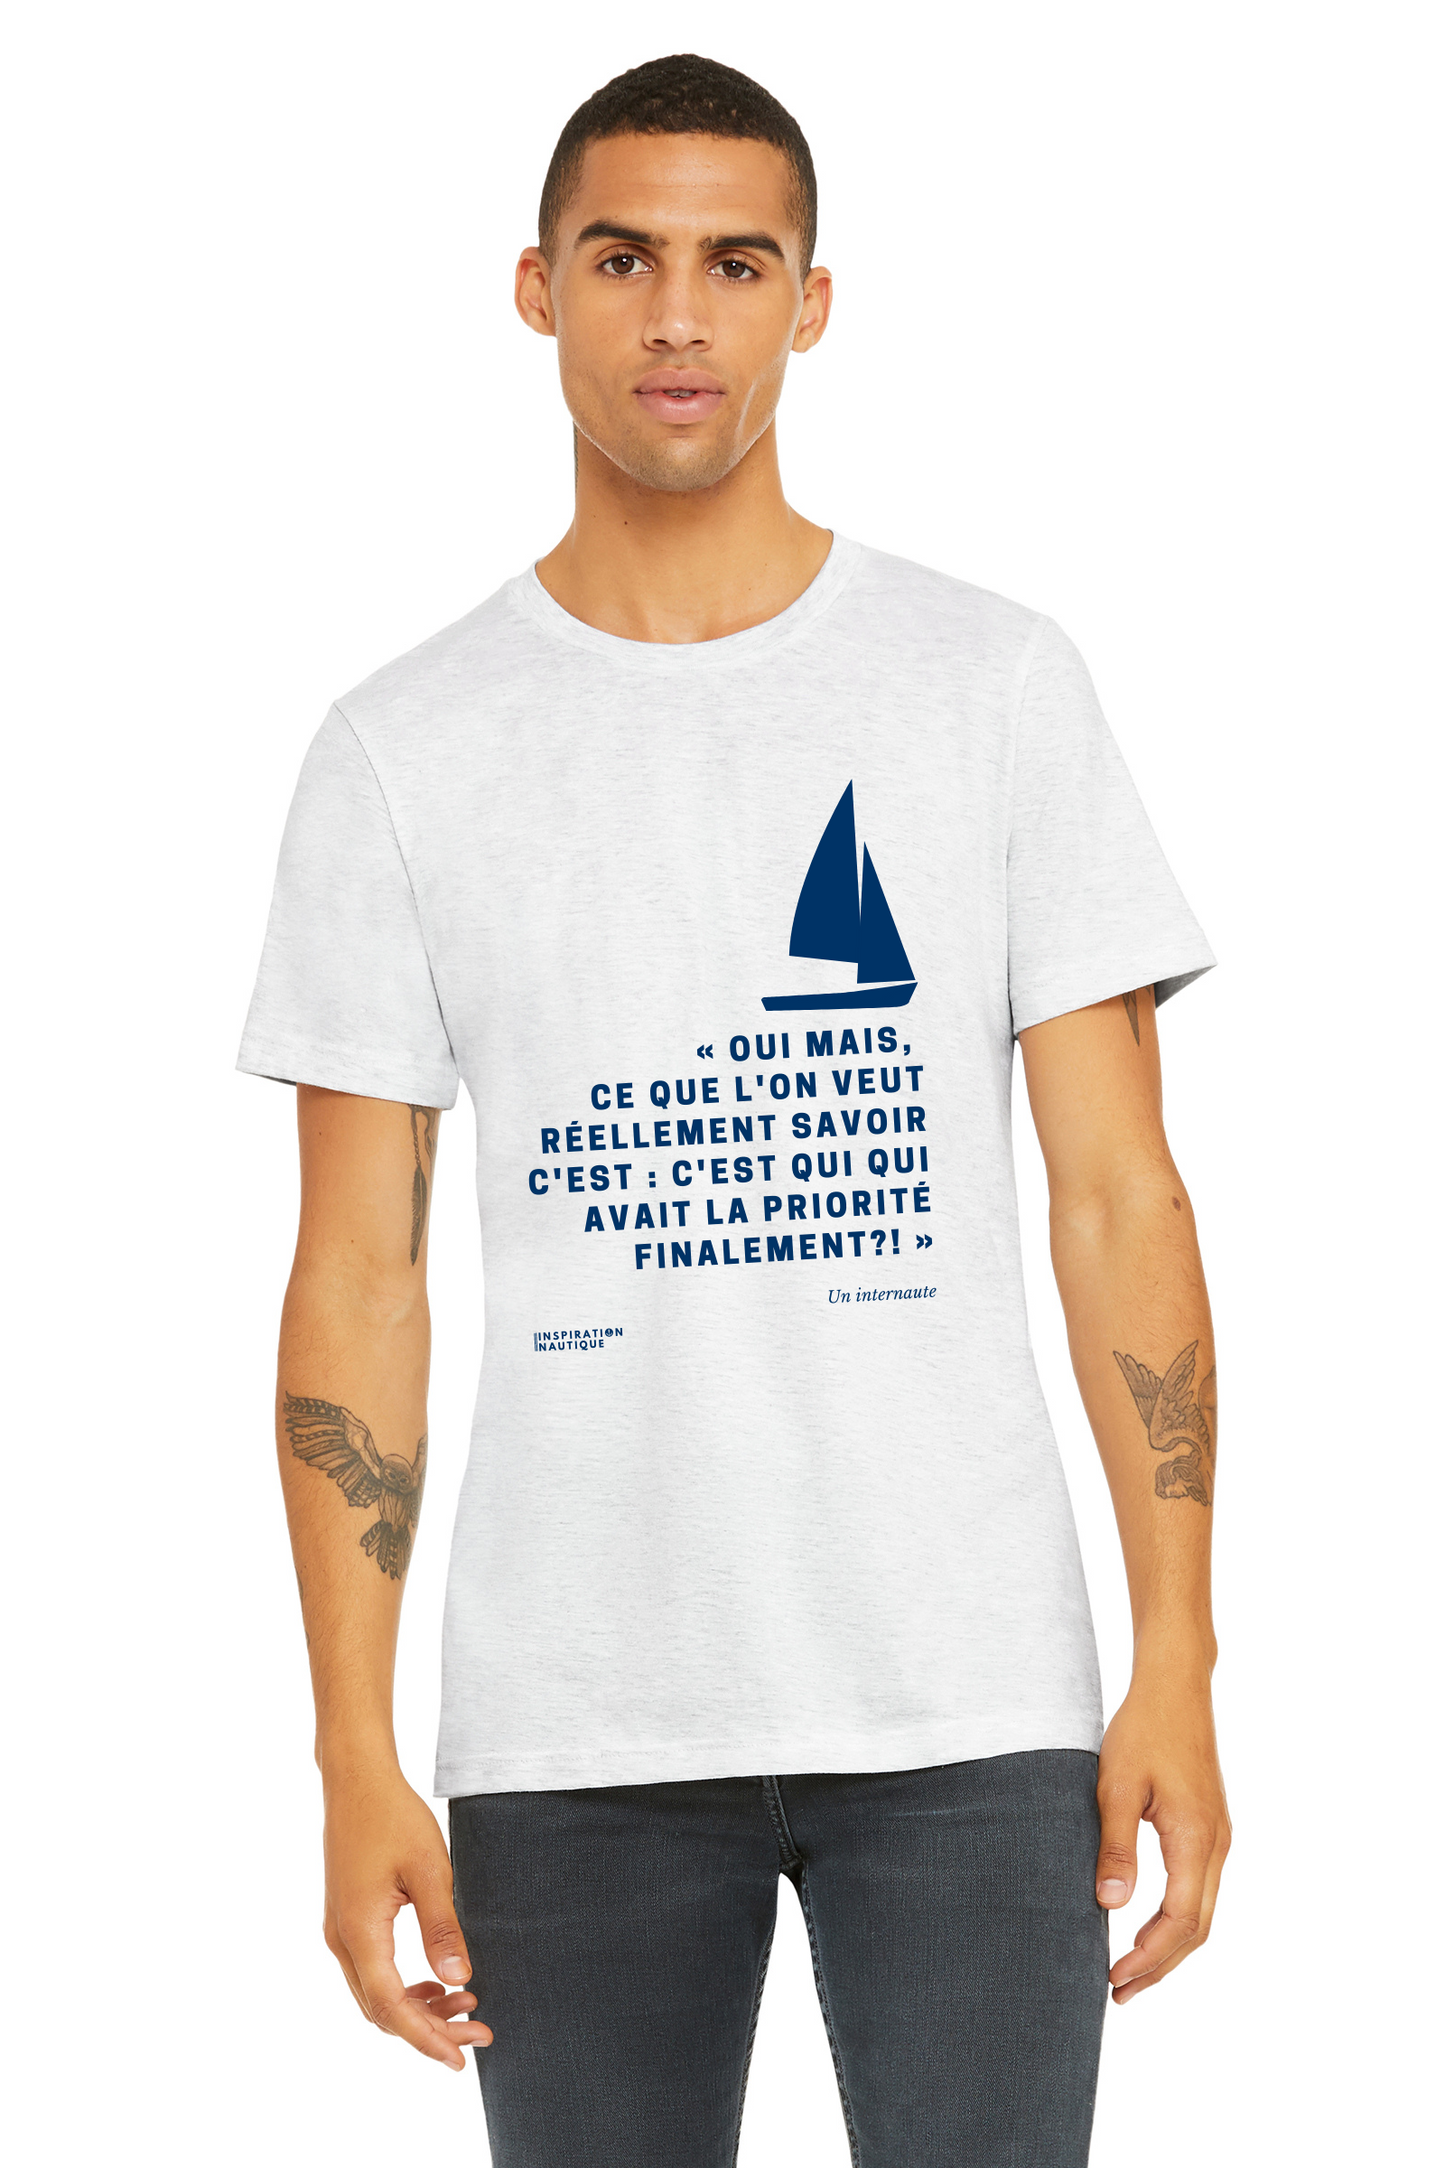 Unisex t-shirt: Who had priority in the end? (sailing boat) - Marine visual